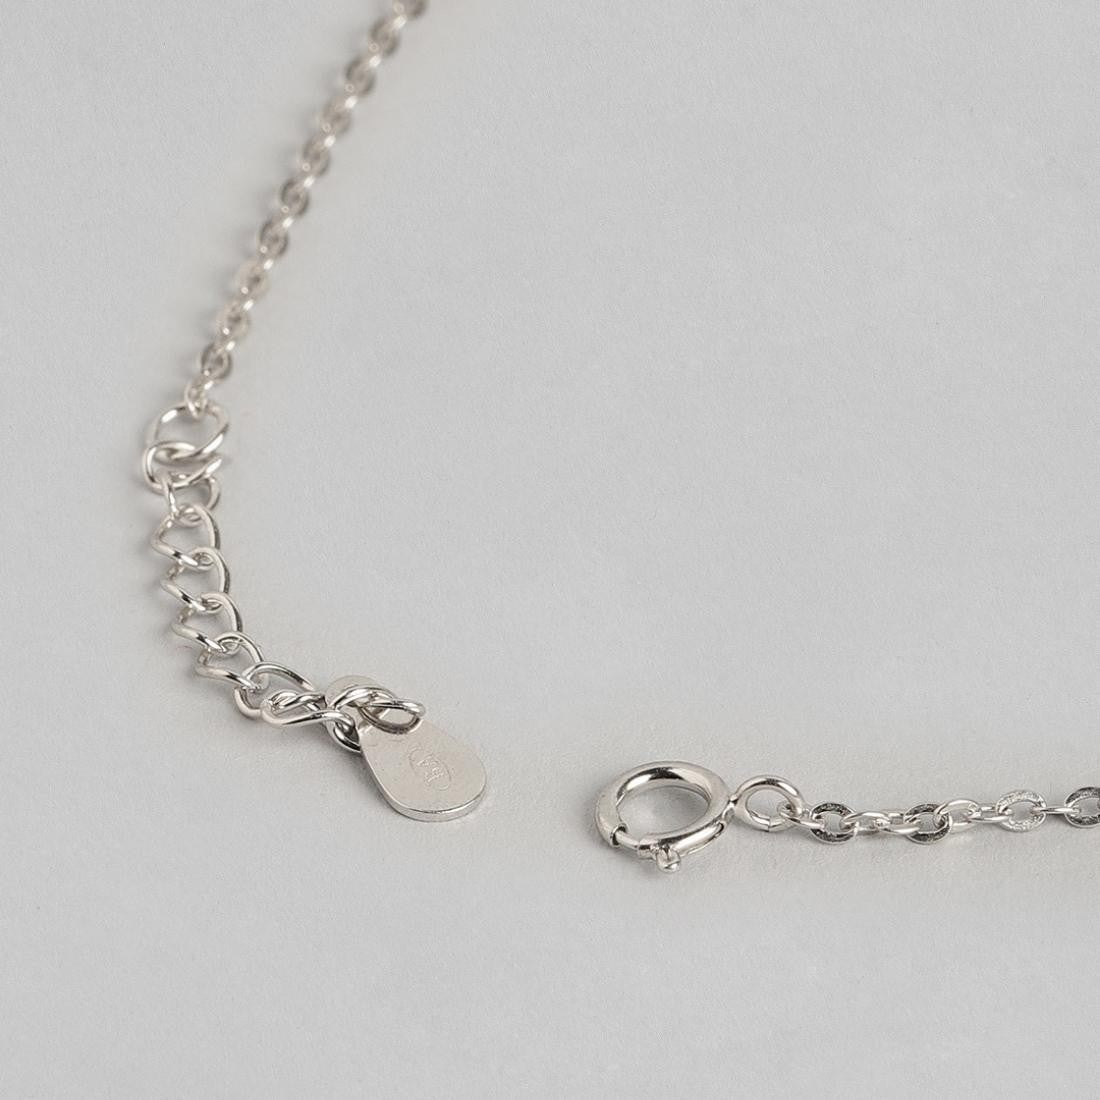 To Infinity and Beyond 925 Silver Bracelet